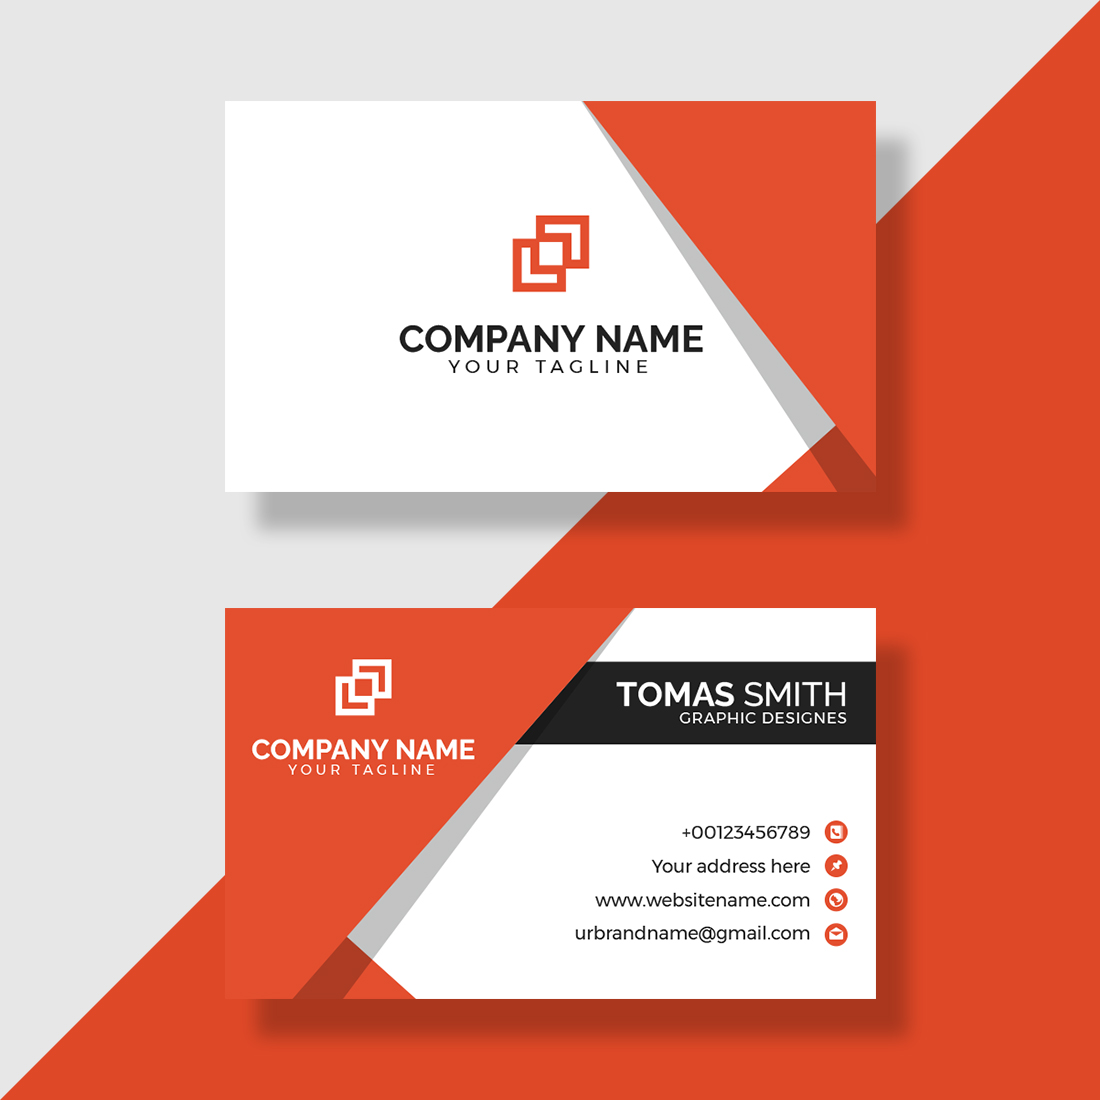 Business Card and Visiting Card Design Print-Ready